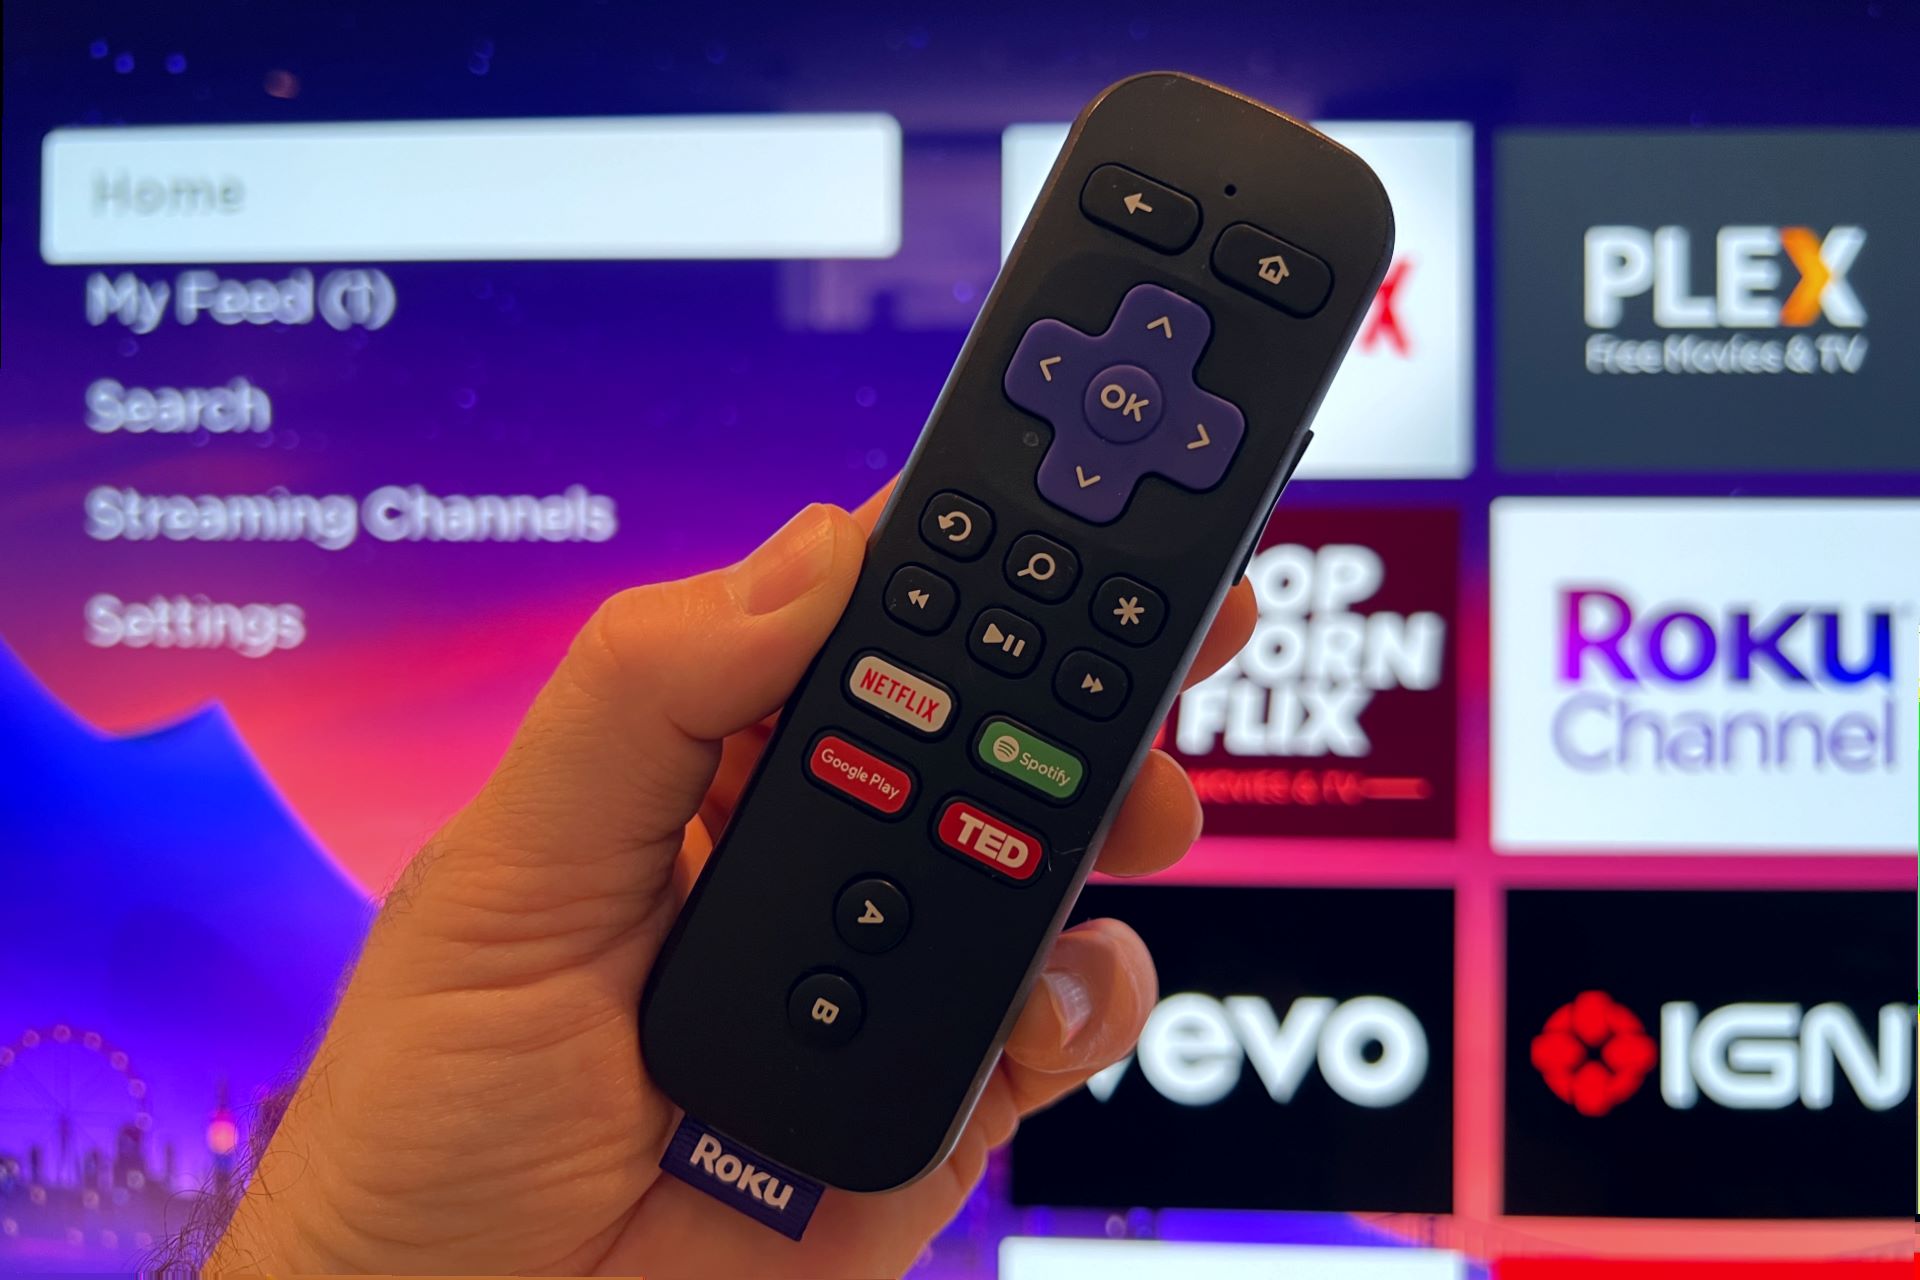 roku-requires-users-to-consent-to-new-terms-before-accessing-devices